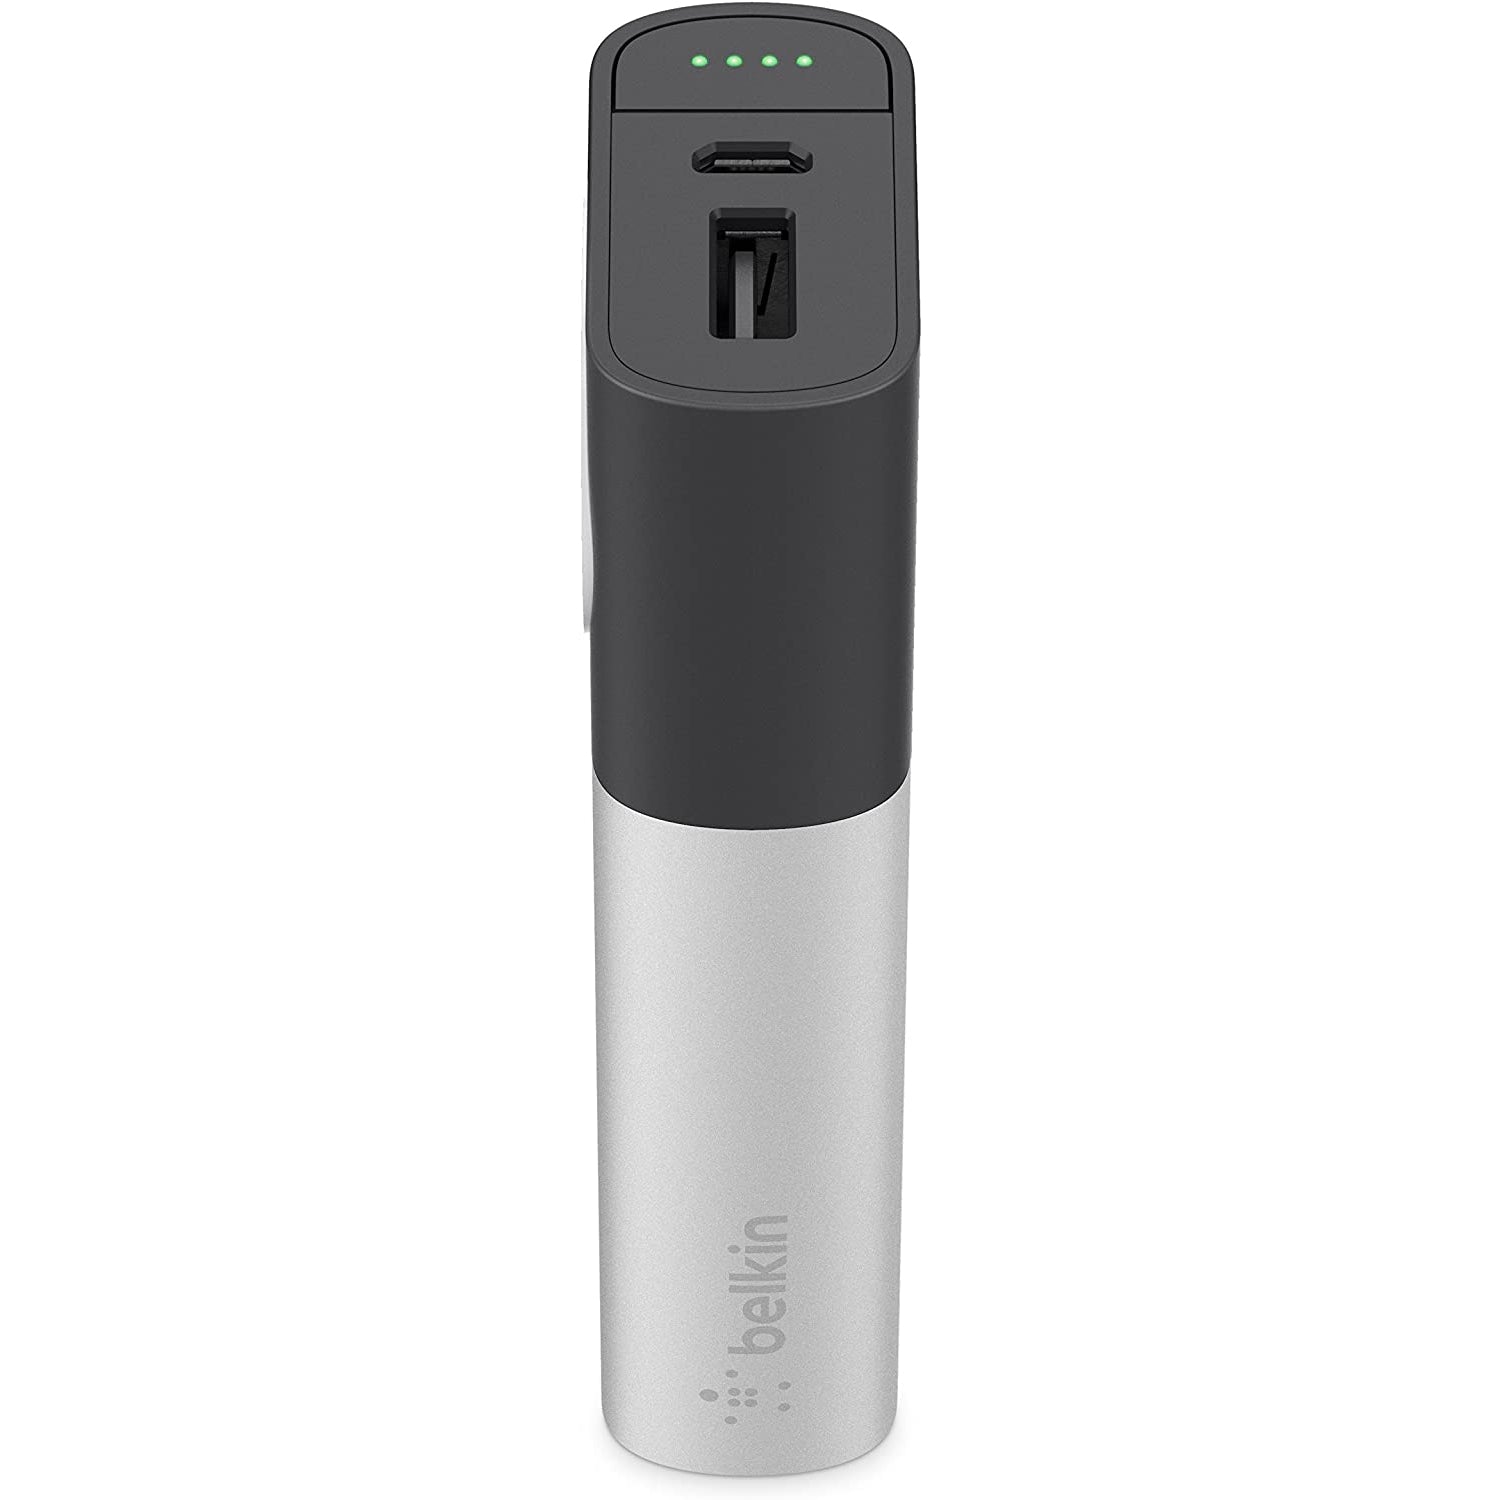 Belkin Valet Charger Dual Power Pack 6700mAh - Dual Apple Watch and iPhone